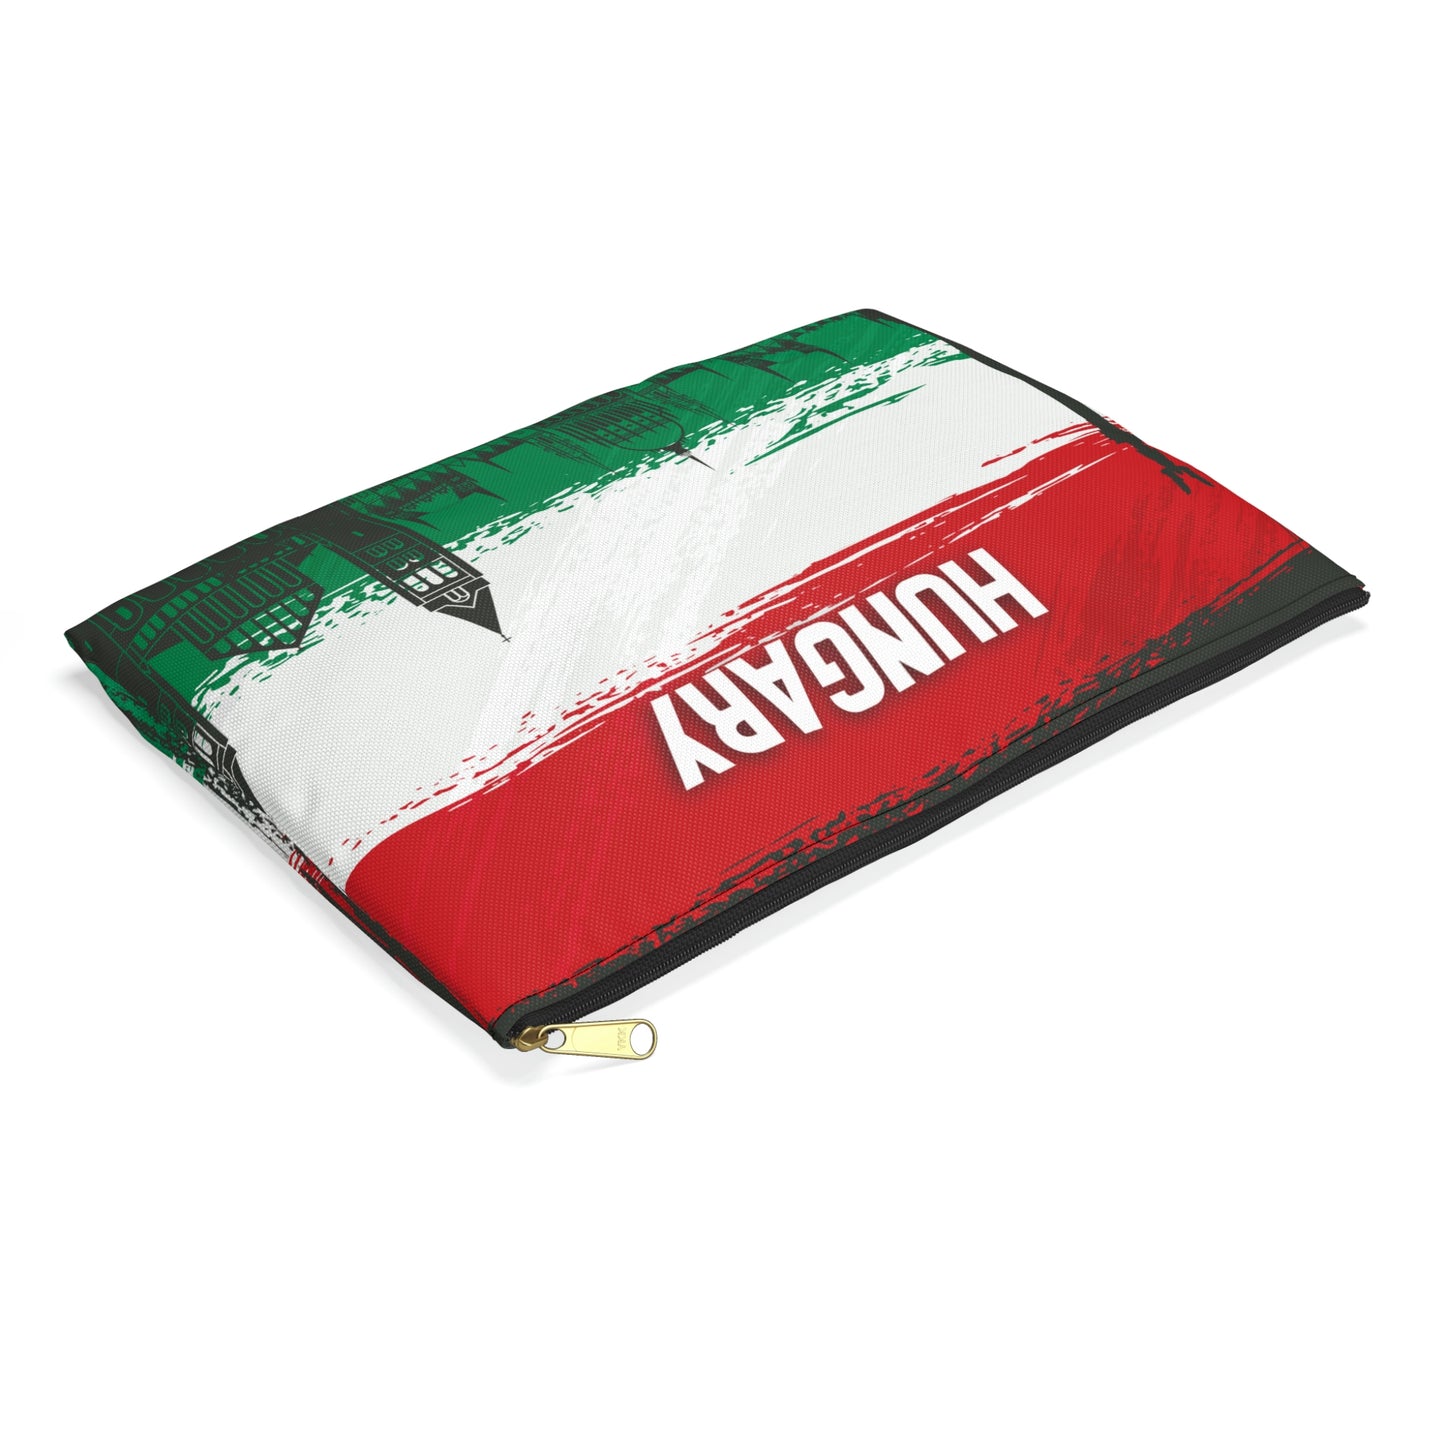 Hungary Accessory Pouch